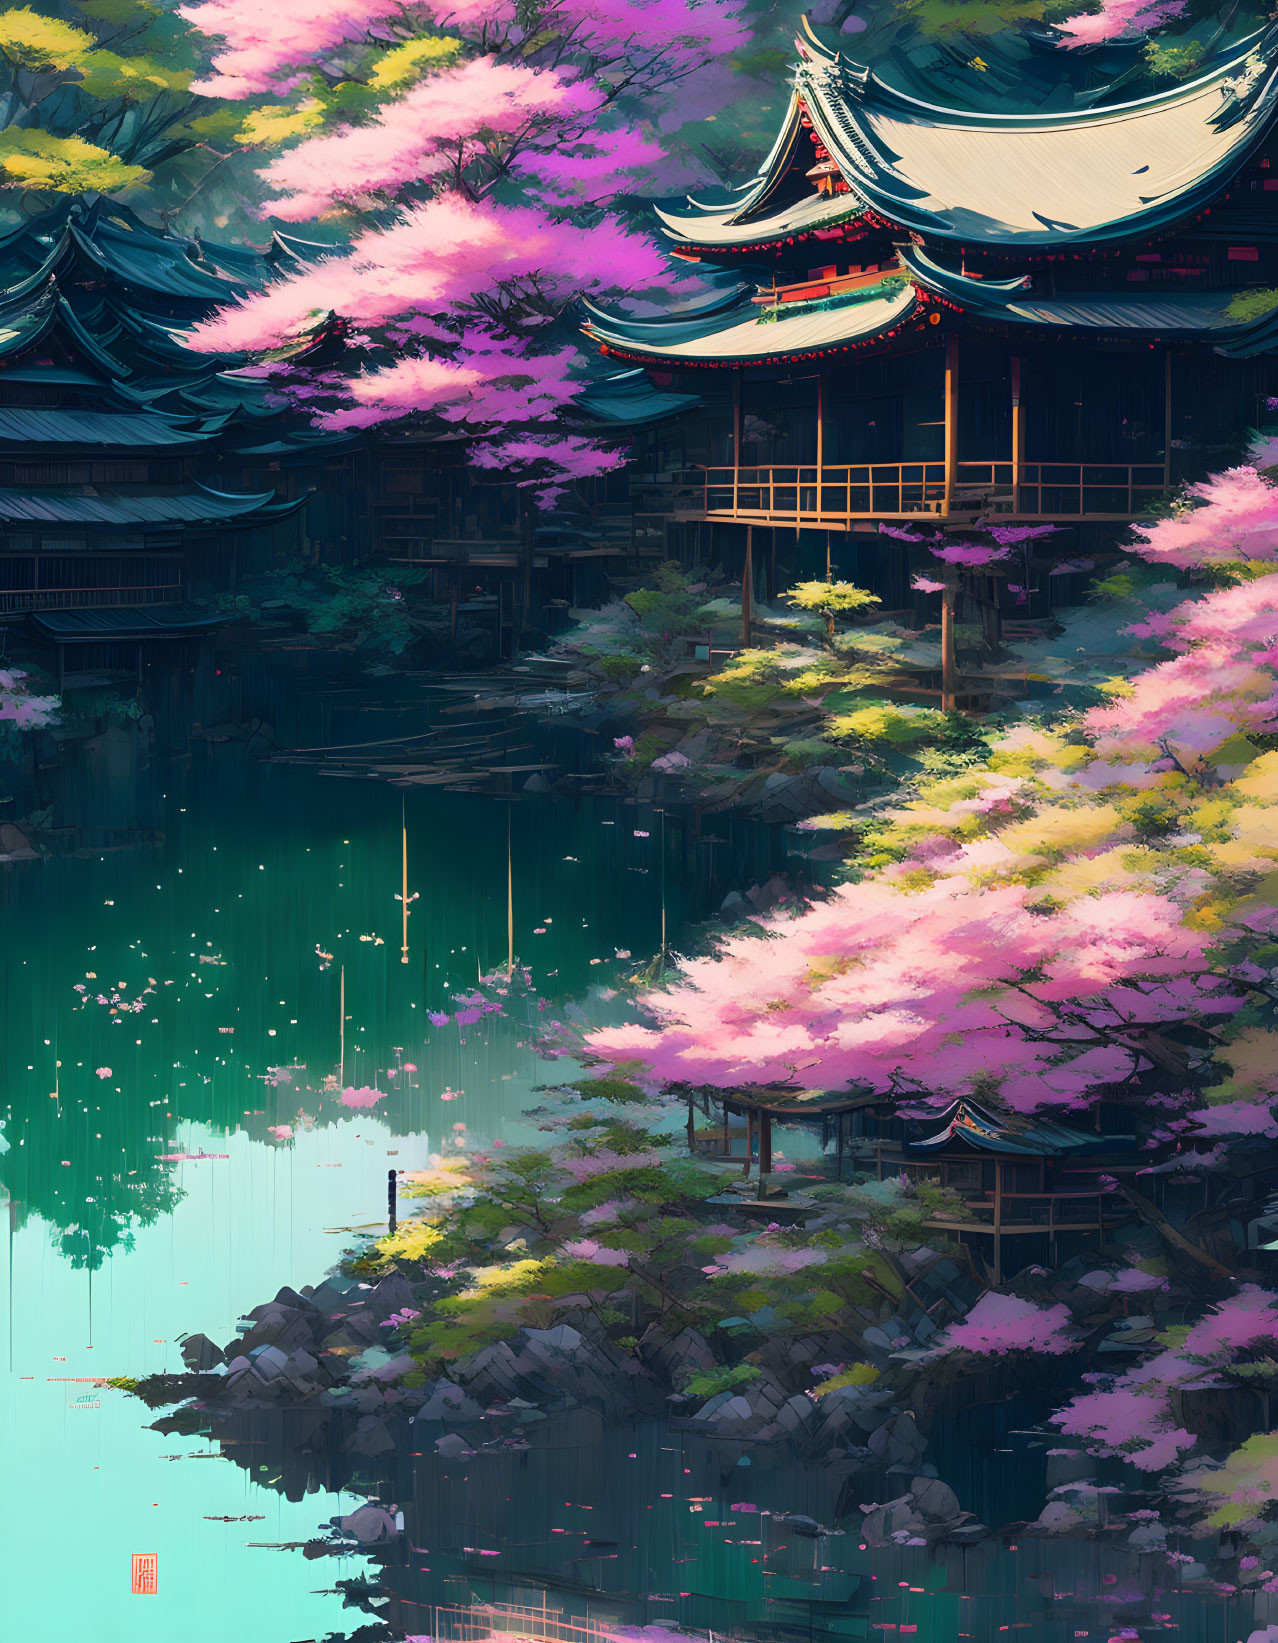 Traditional Asian architecture surrounded by pink blossoming trees near a serene pond